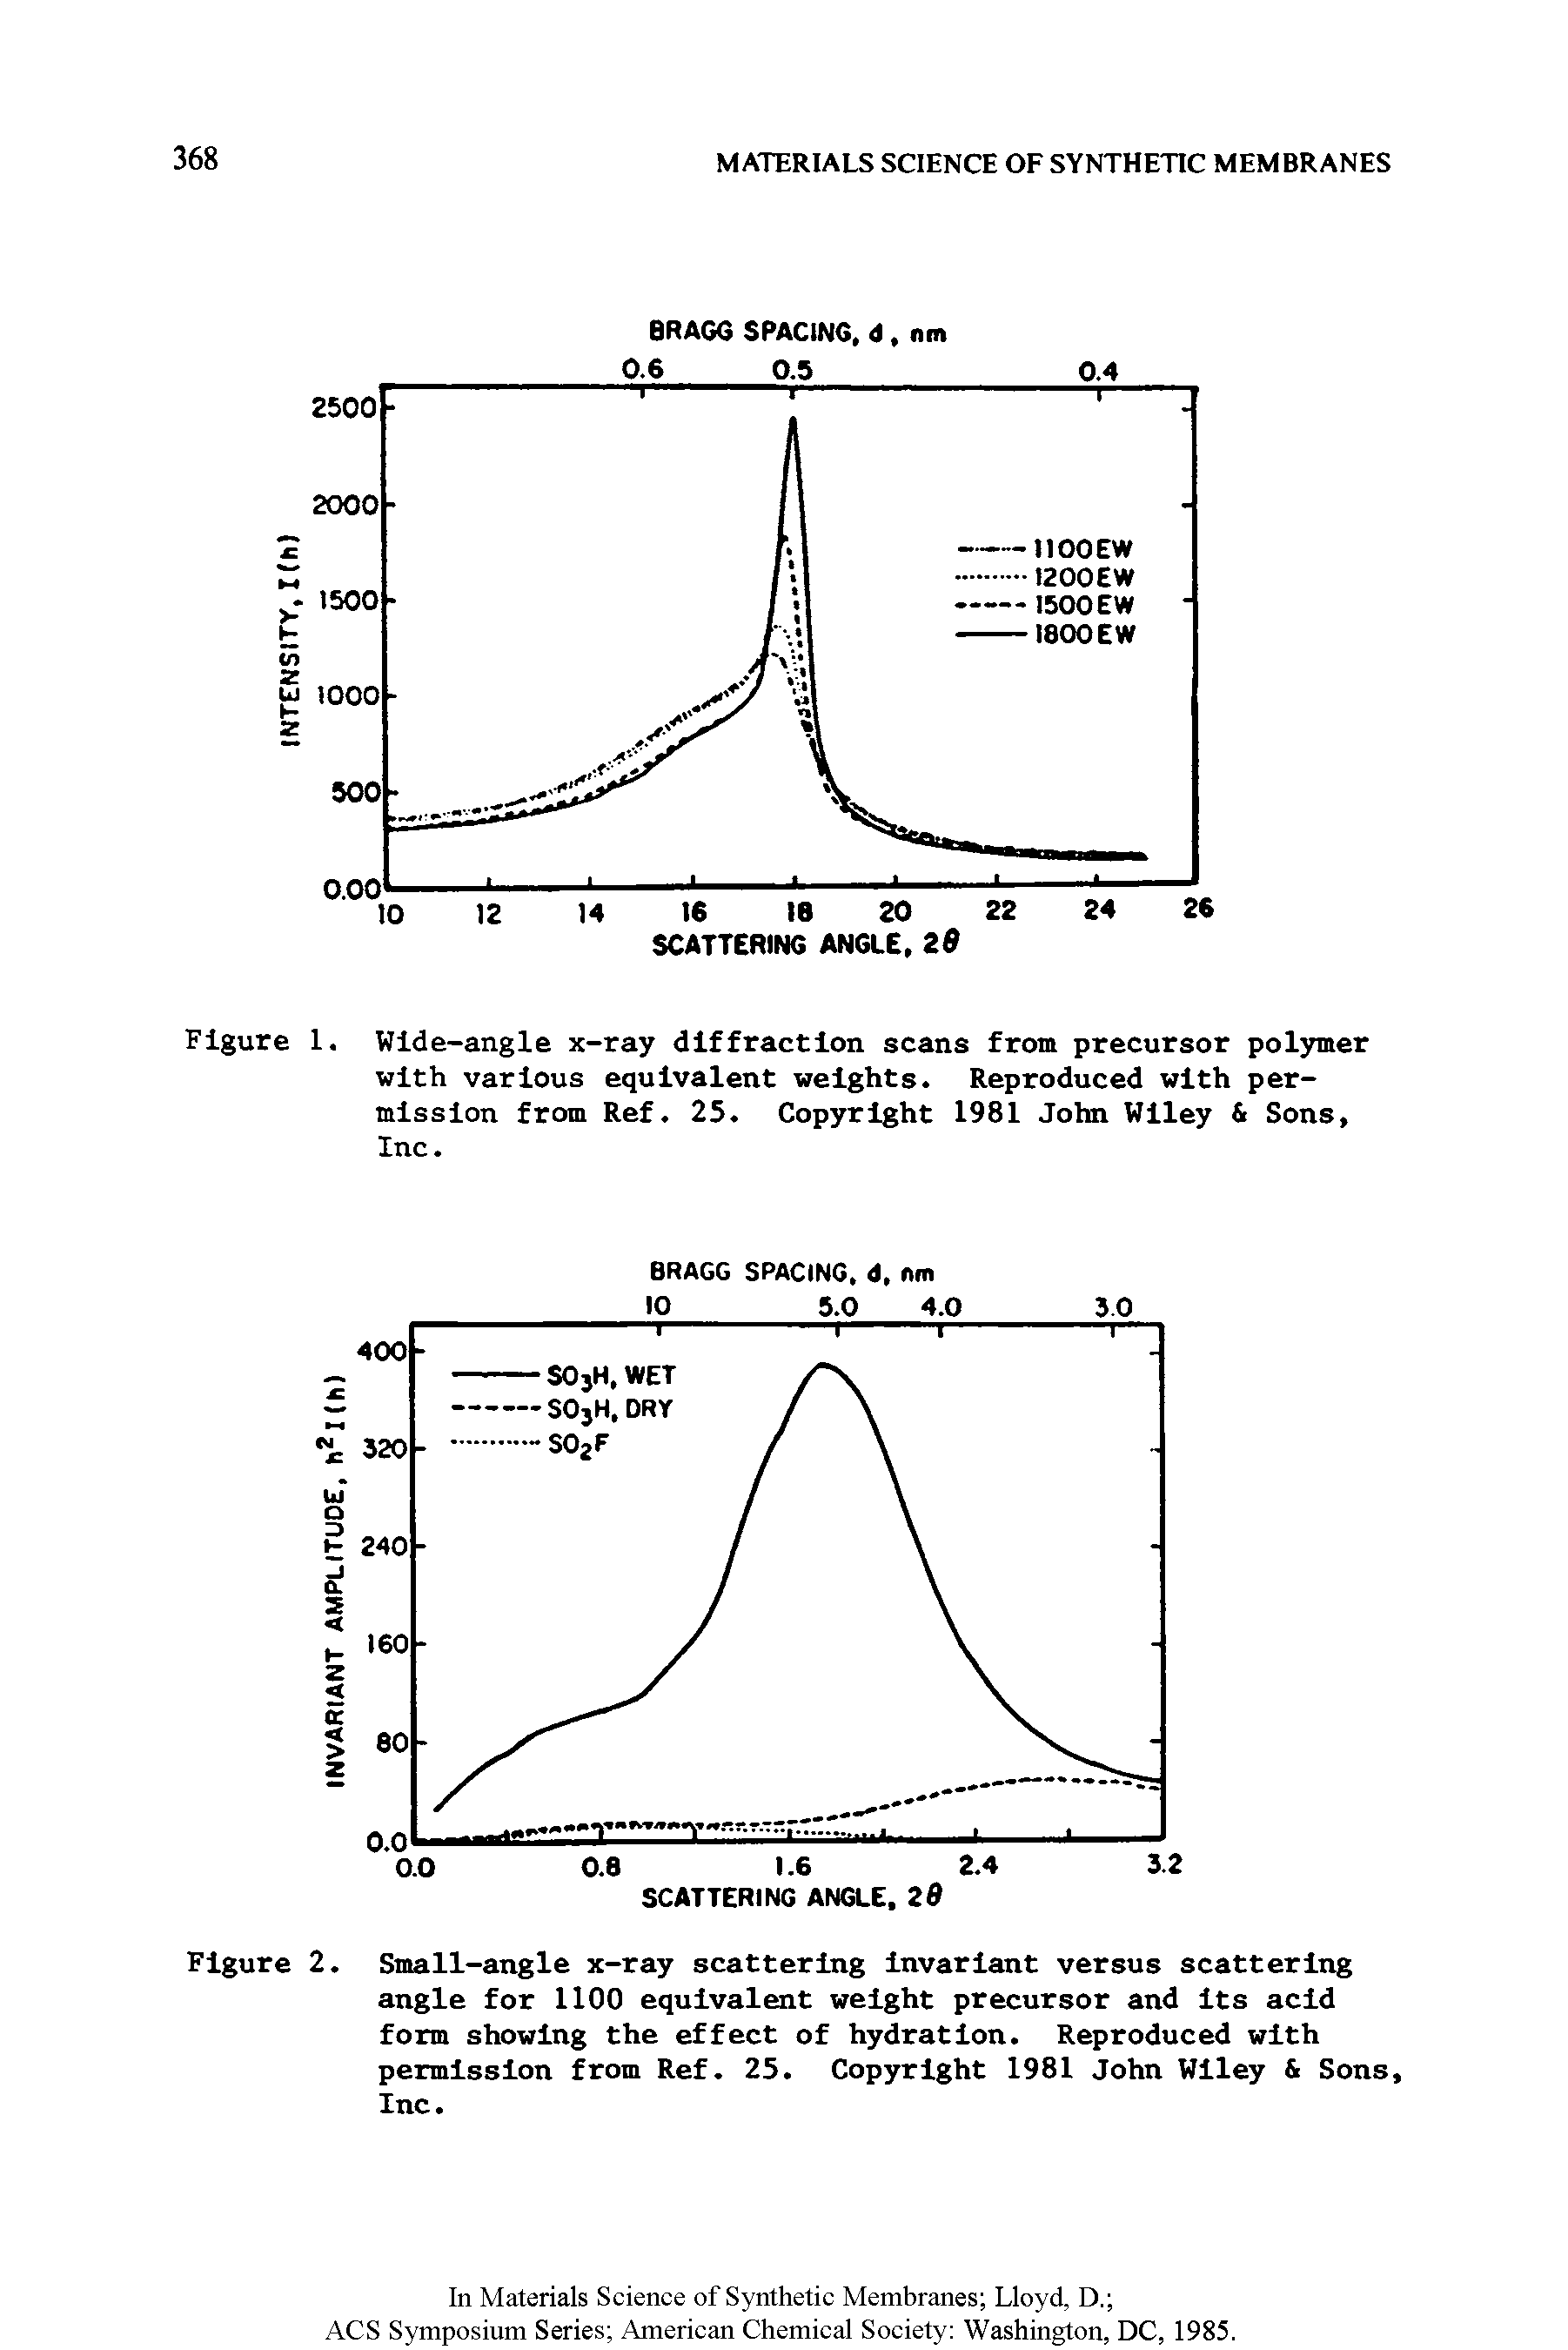 Figure 2. Small-angle x-ray scattering invariant versus scattering angle for 1100 equivalent weight precursor and Its acid form showing the effect of hydration. Reproduced with permission from Ref. 25. Copyright 1981 John Wiley Sons, Inc.